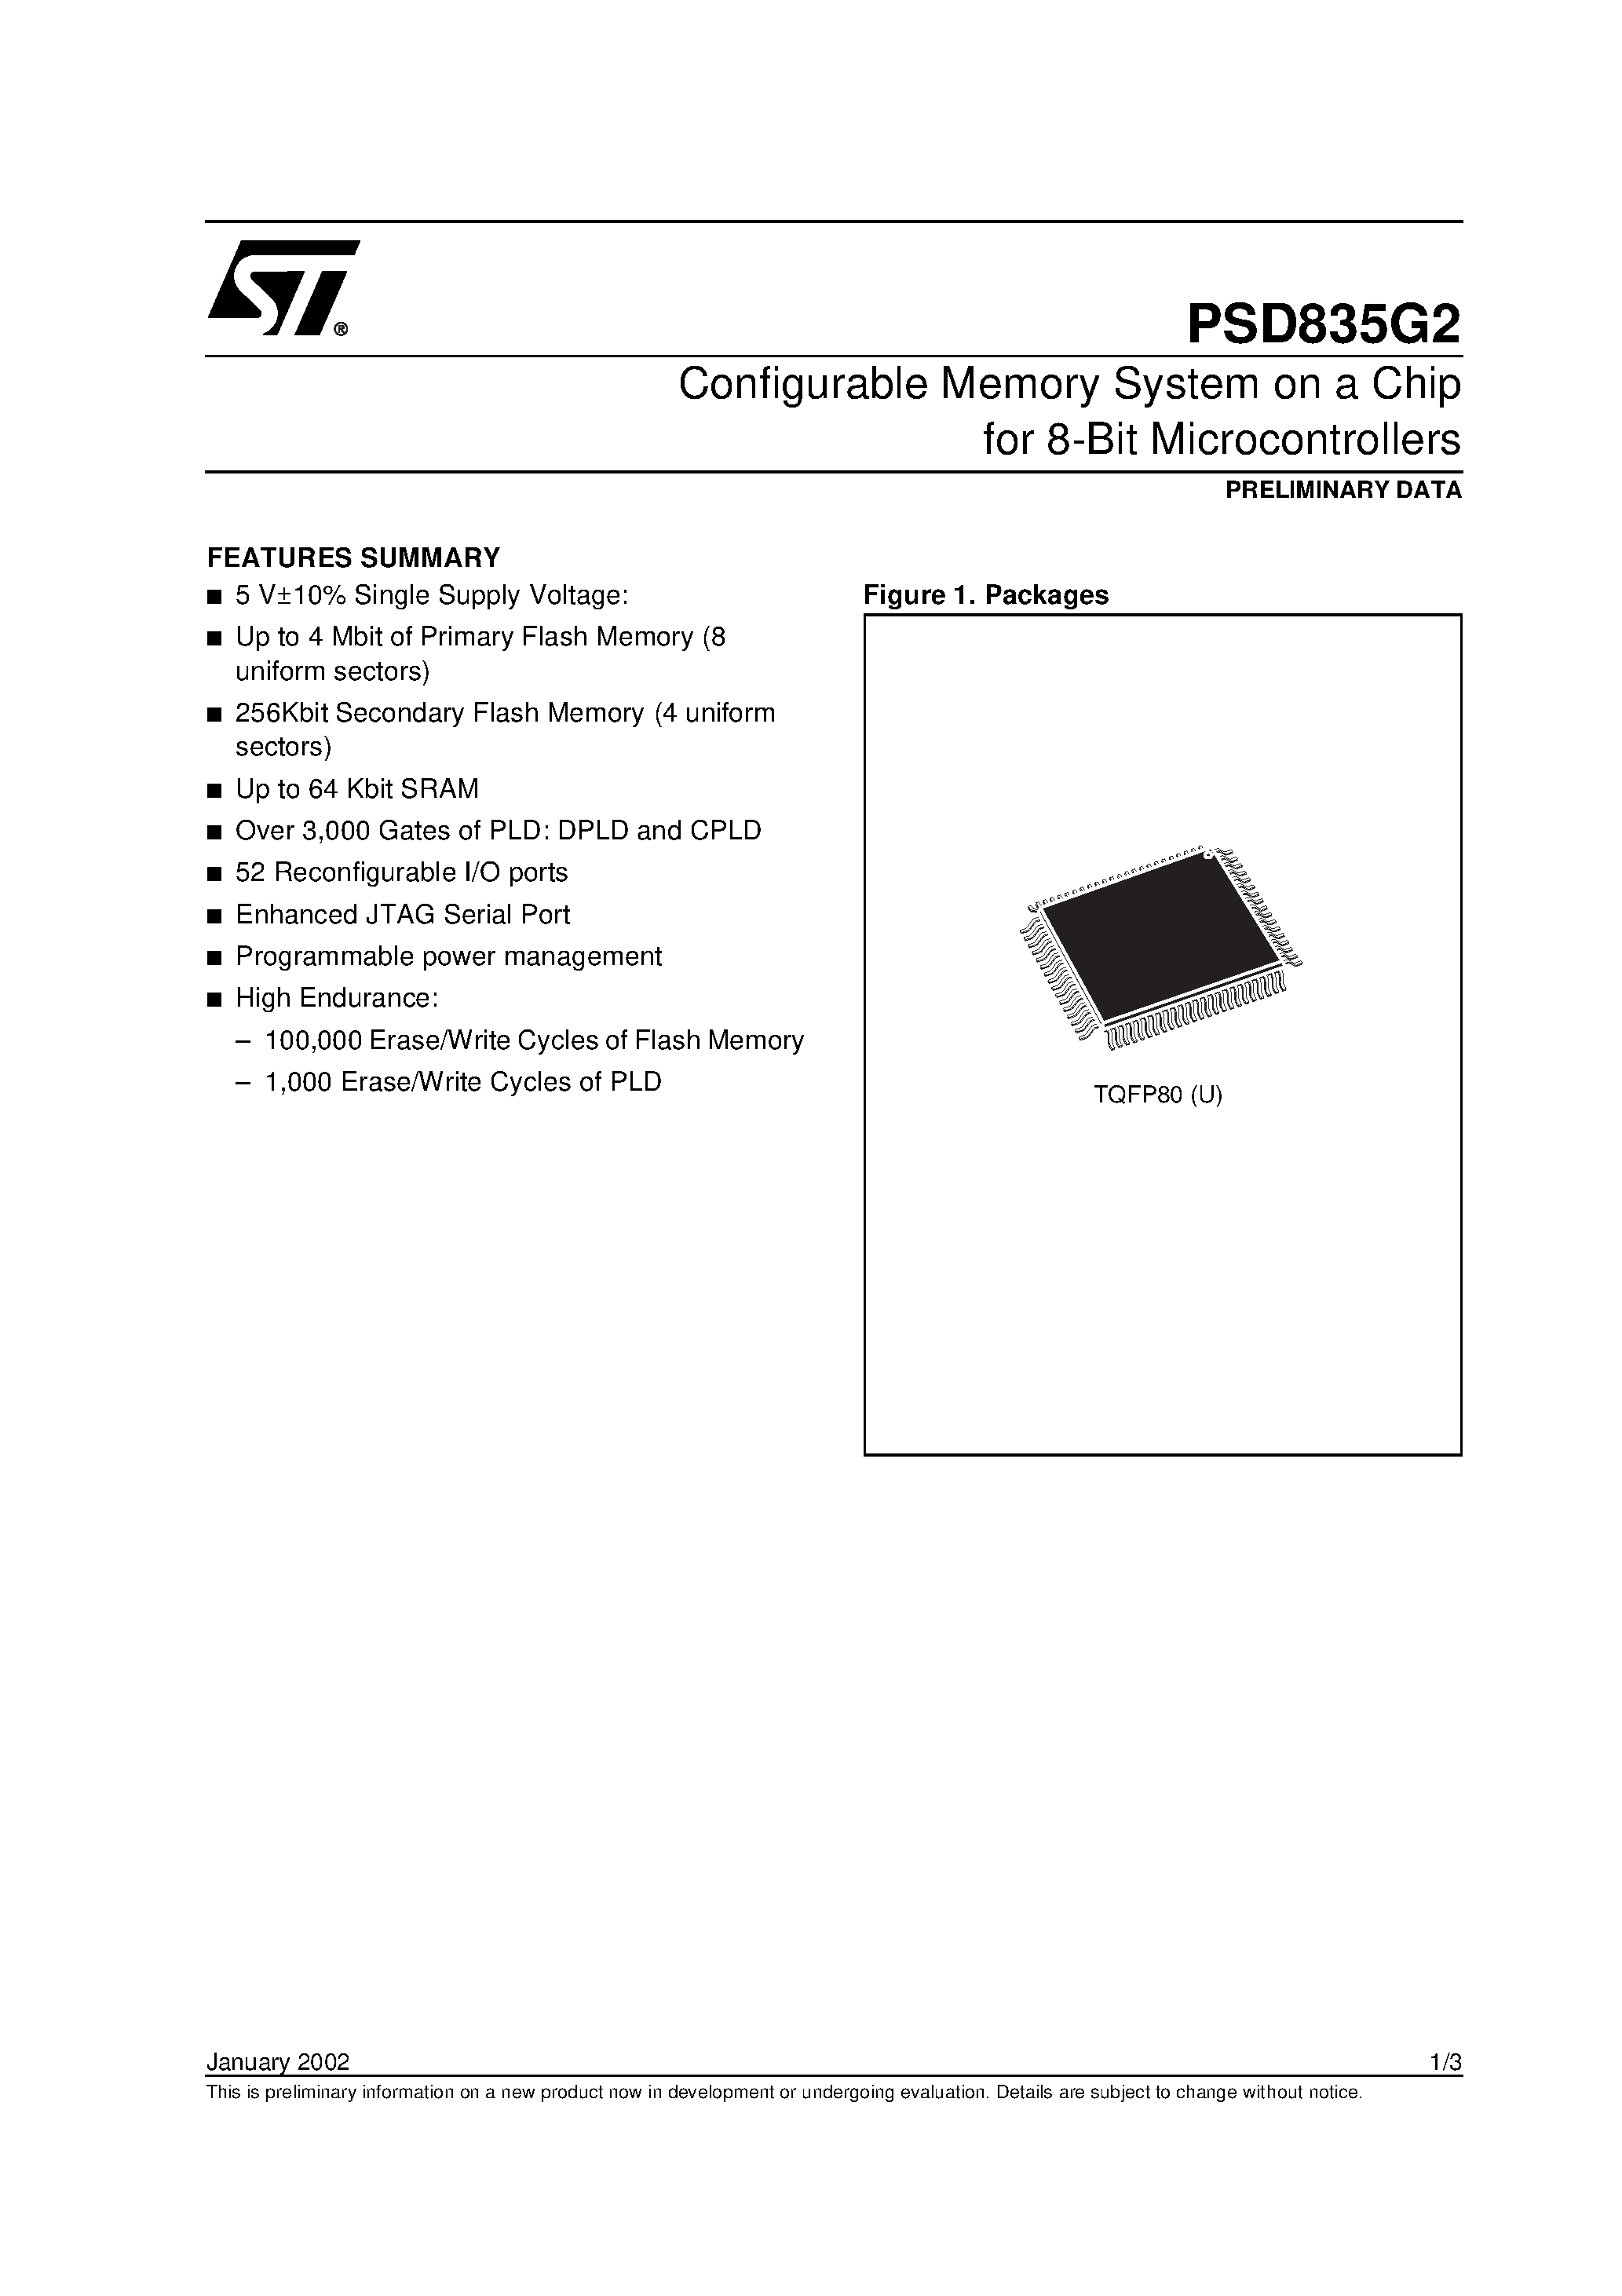 Datasheet PSD835F1V-A-90U - Configurable Memory System on a Chip for 8-Bit Microcontrollers page 1